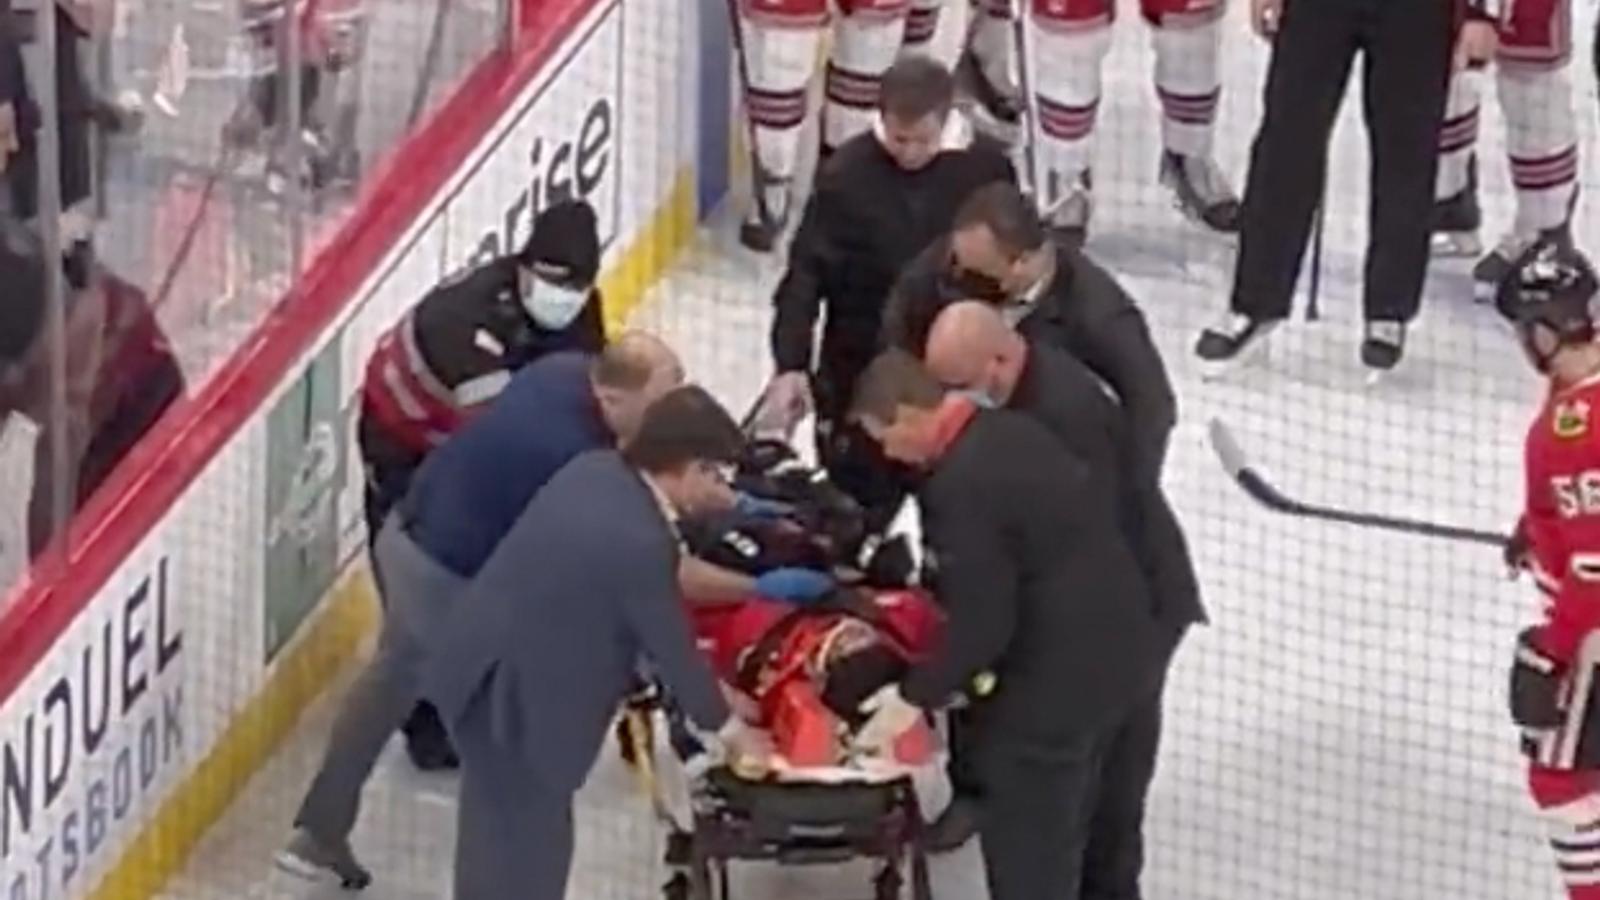 Jujhar Khaira lays motionless on the ice after massive hit, taken out on stretcher